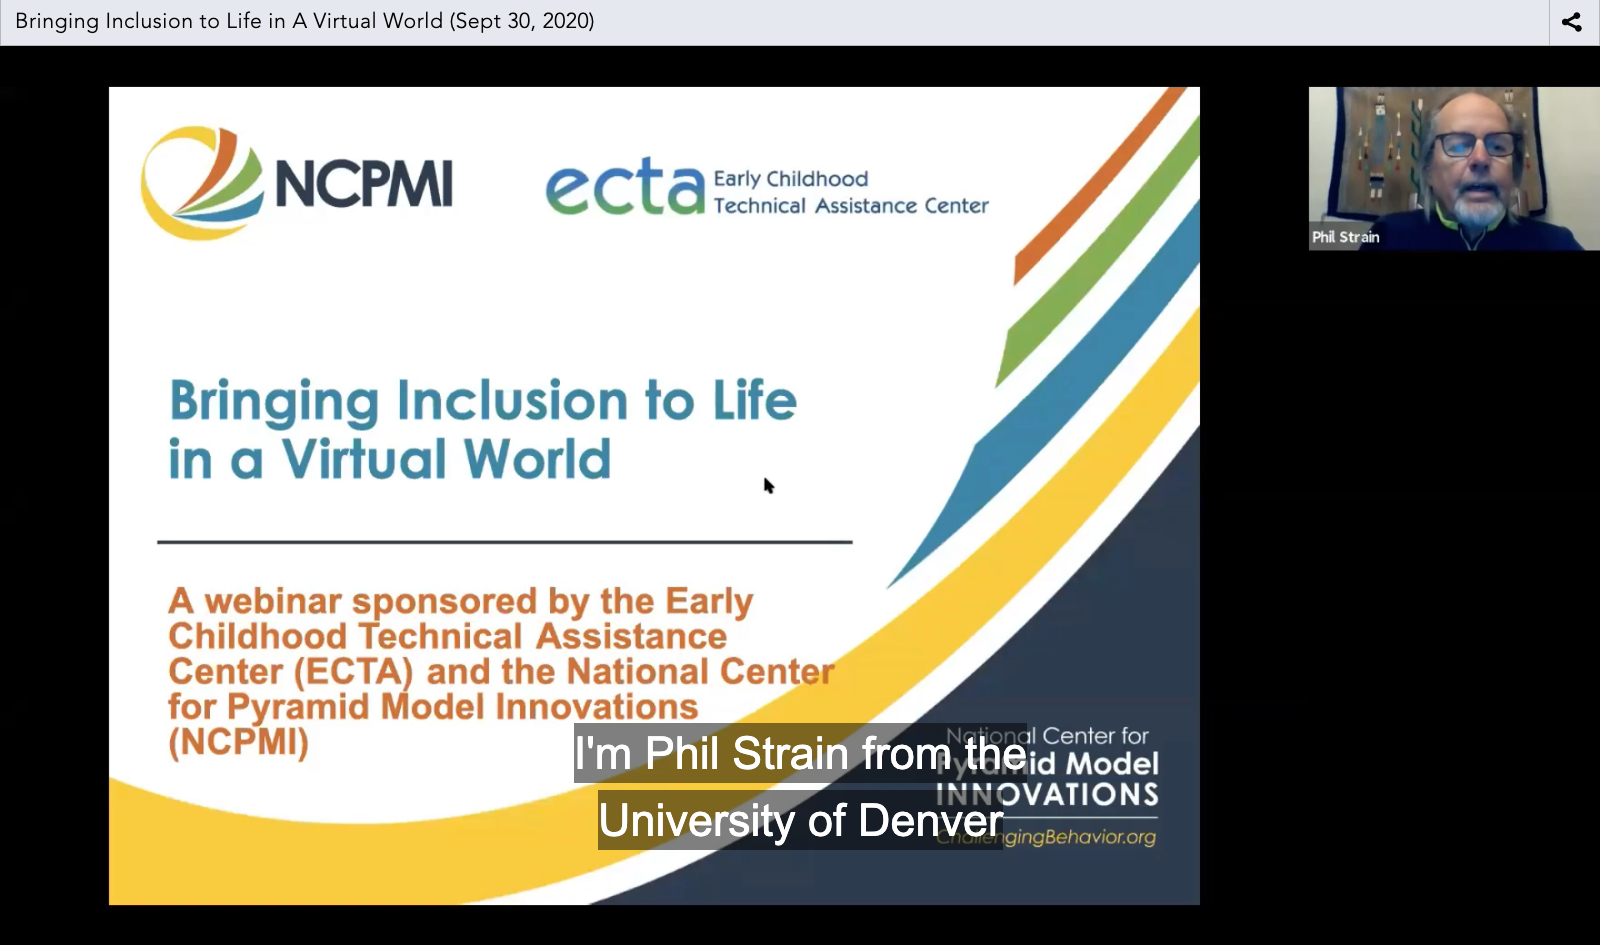 Bringing Inclusion to Life in a Virtual World